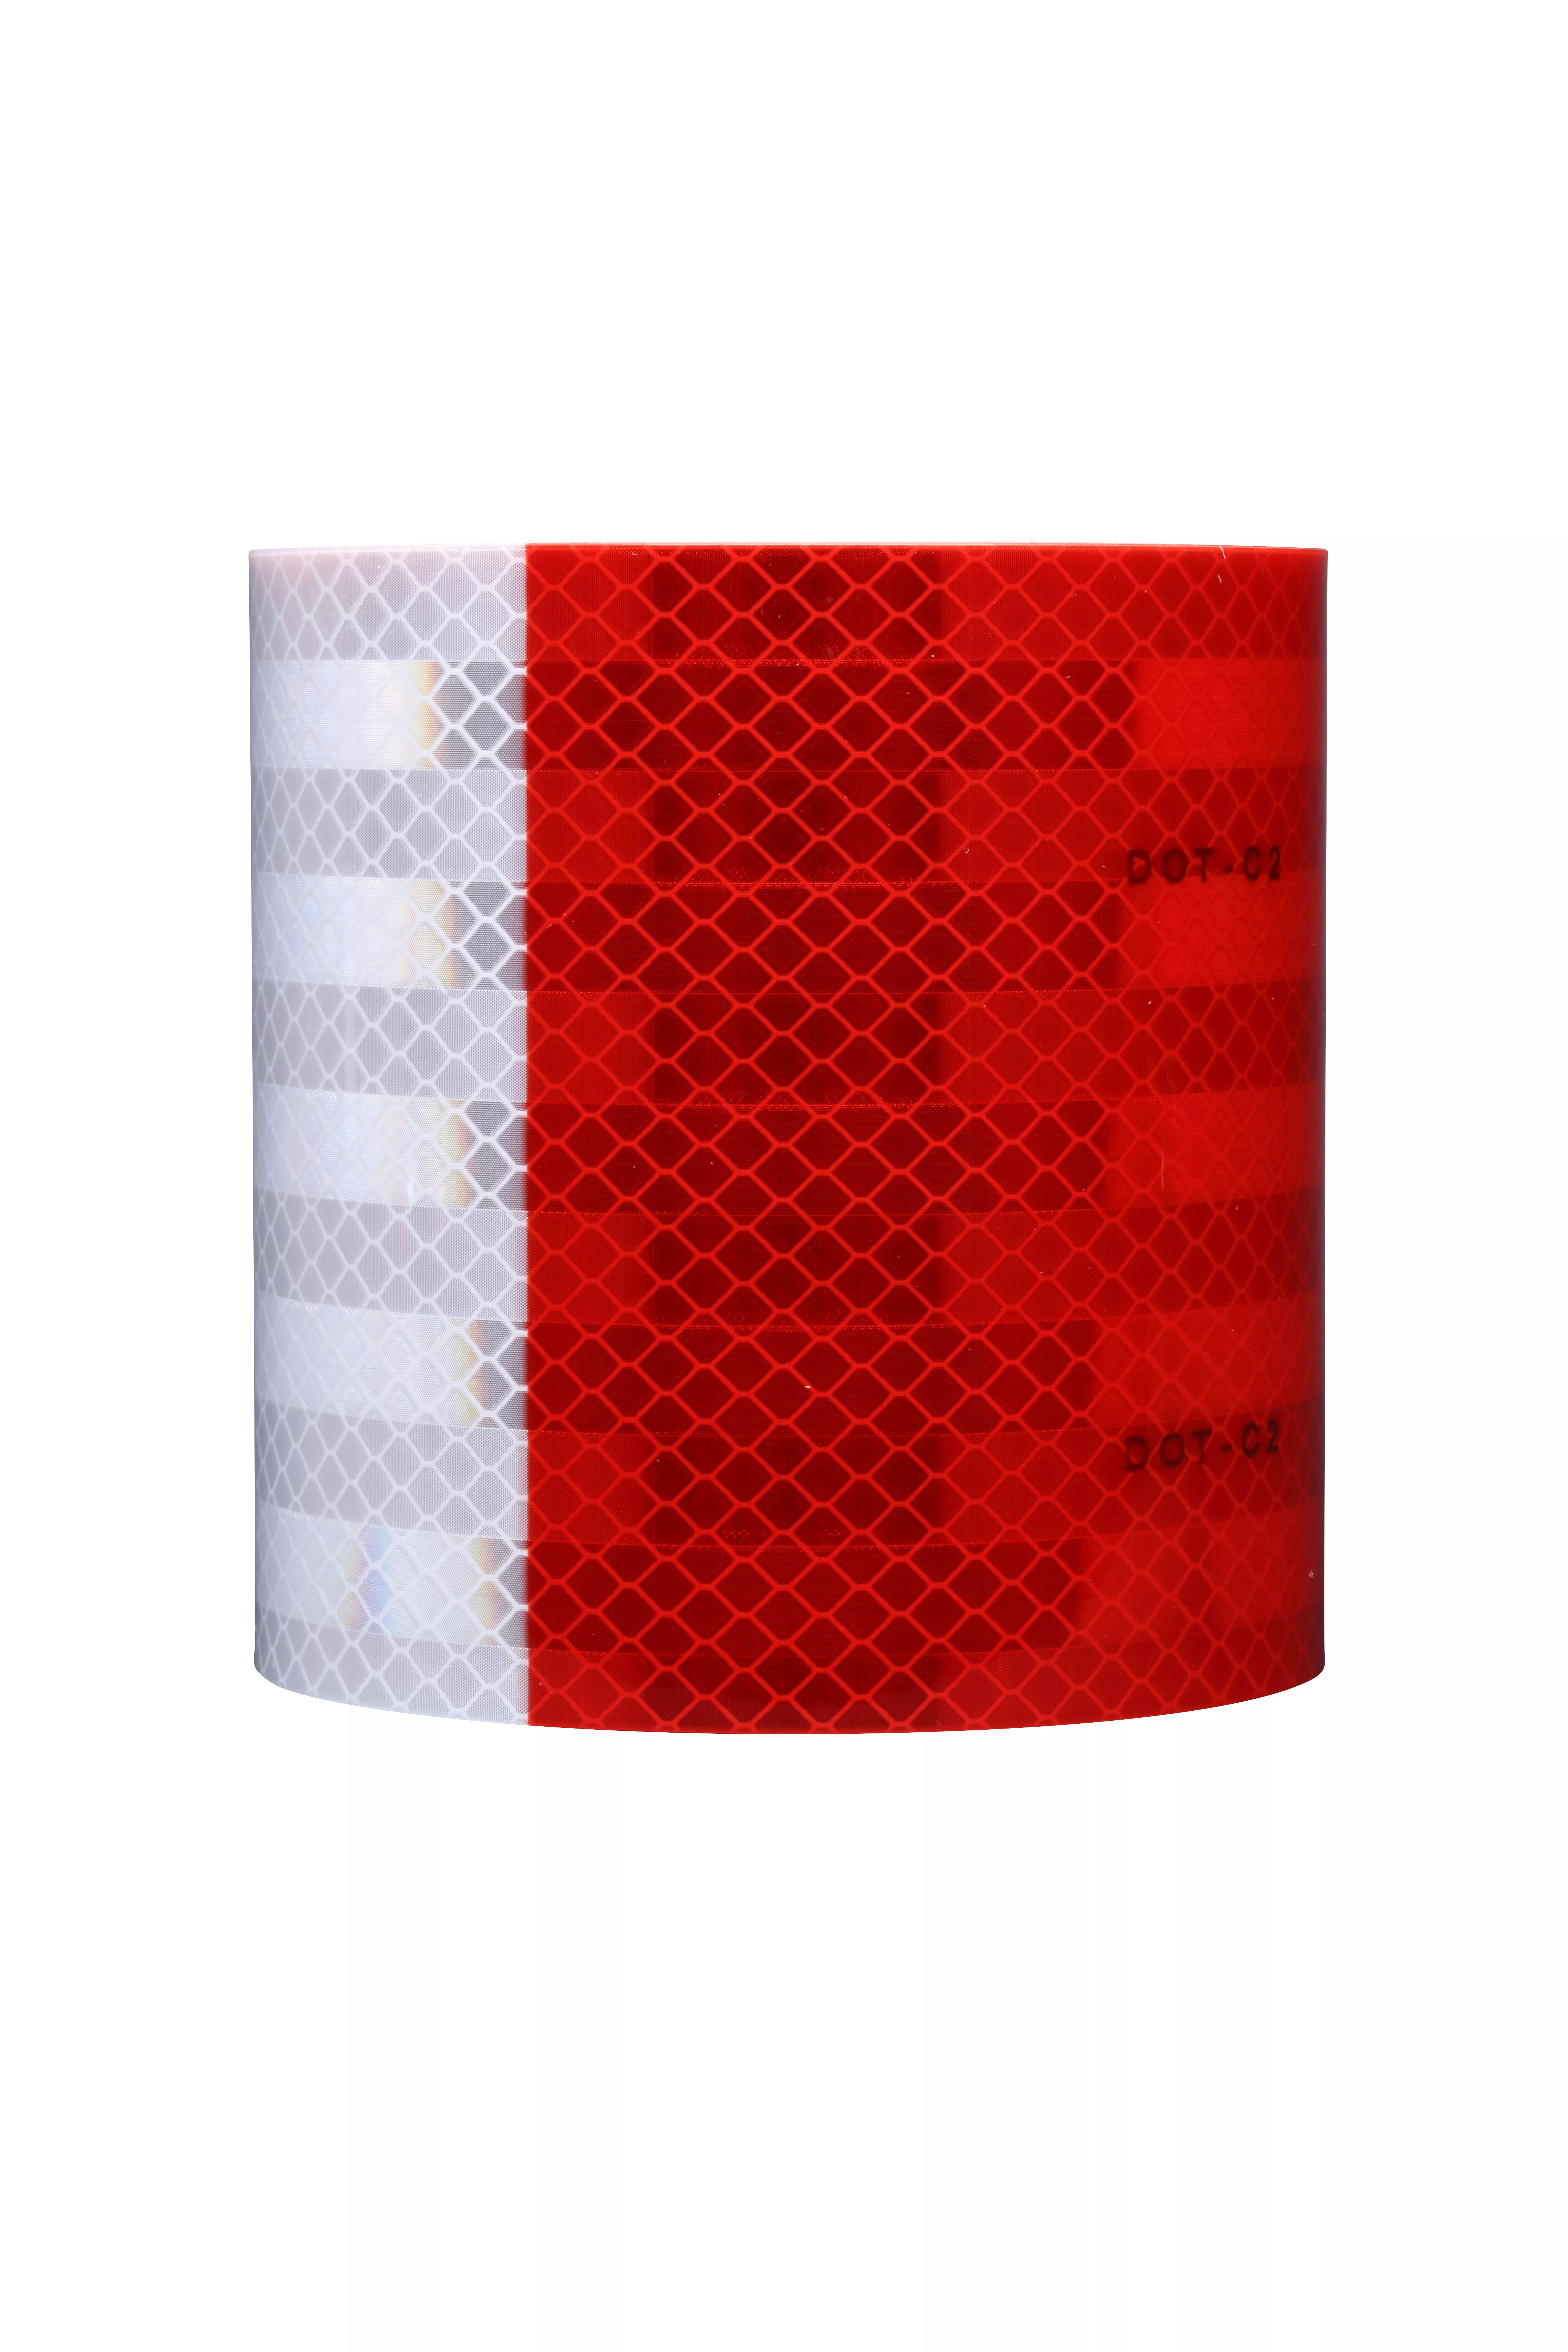 3M™ Diamond Grade™ Conspicuity Markings 983-32, Red/White, Vendor Only,
6 in x 200 yd